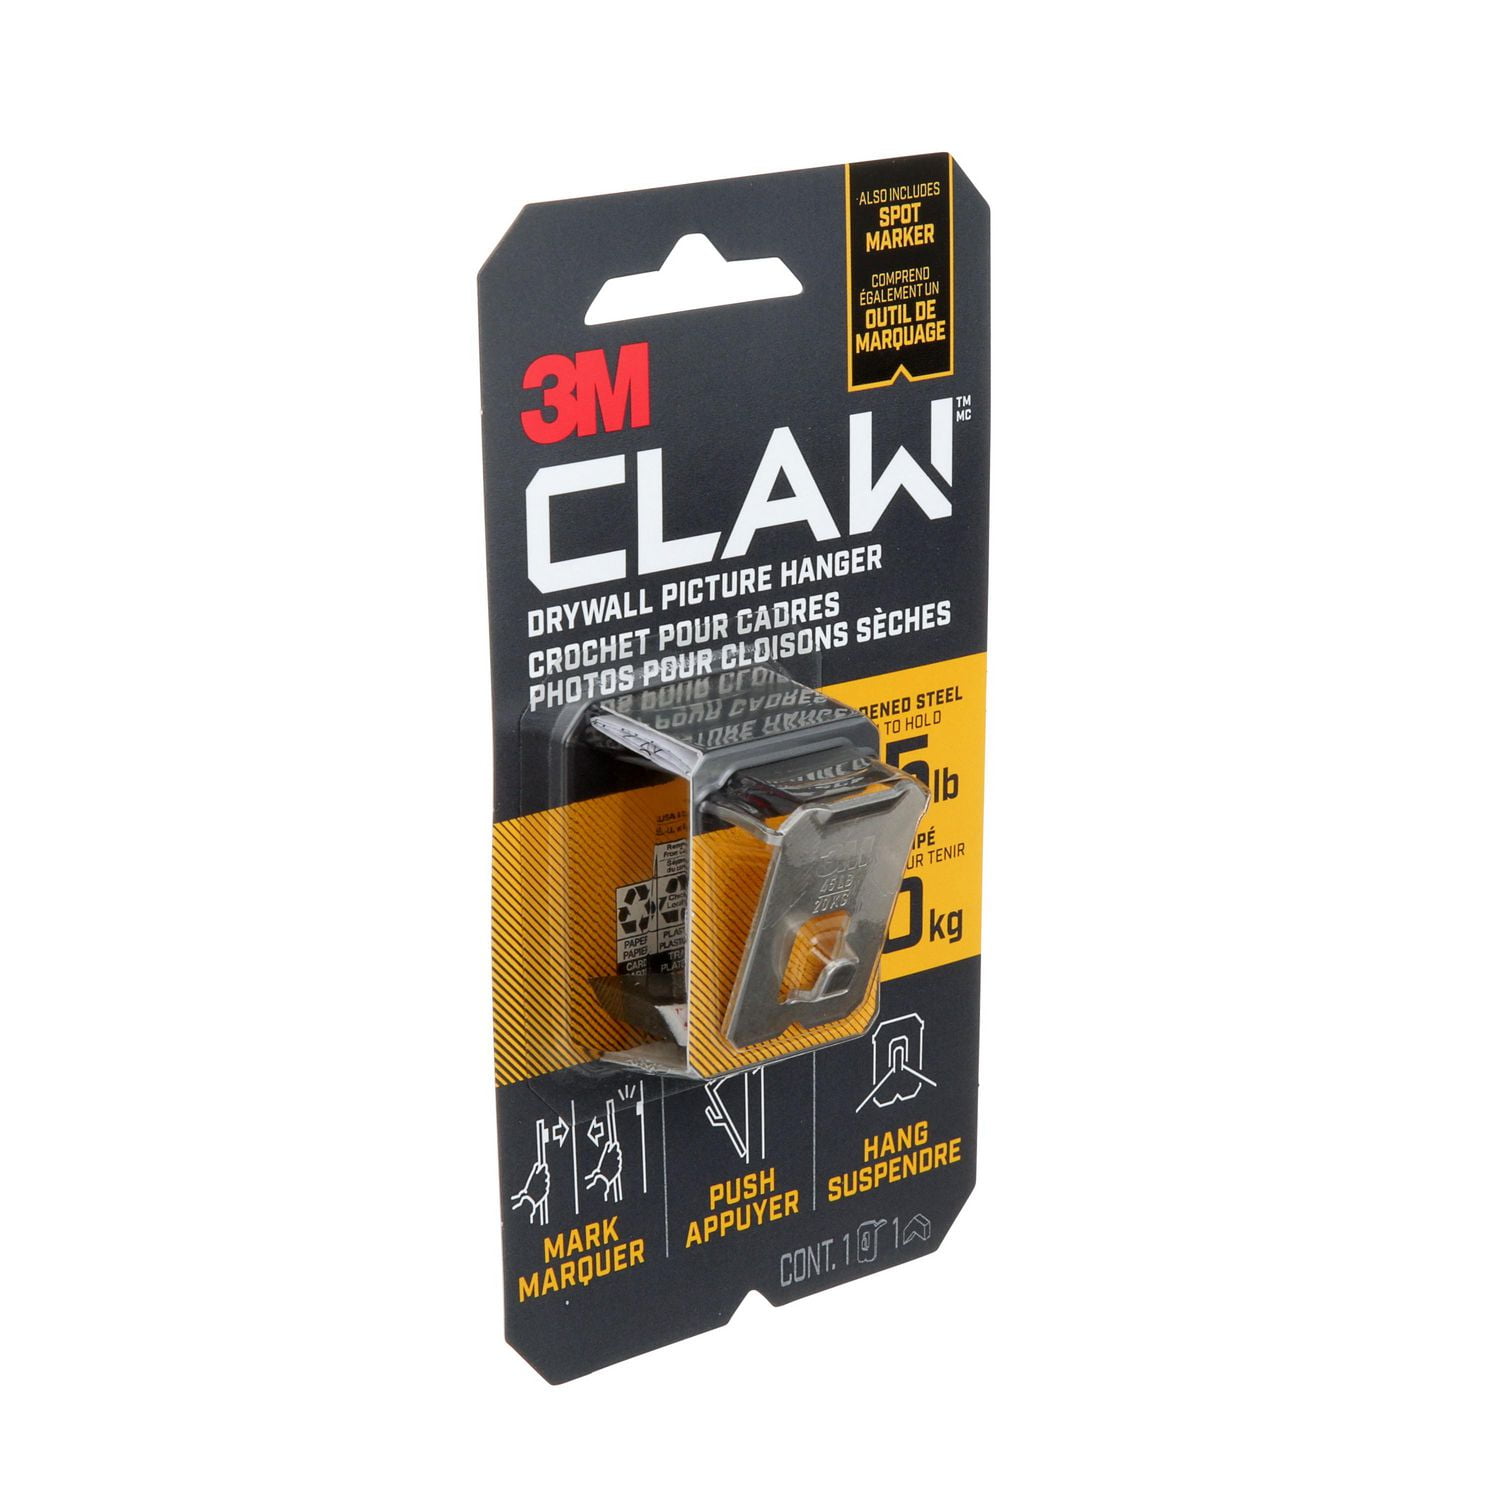 3M Claw(TM) Drywall Picture Hanger with Temporary Spot Marker Kit